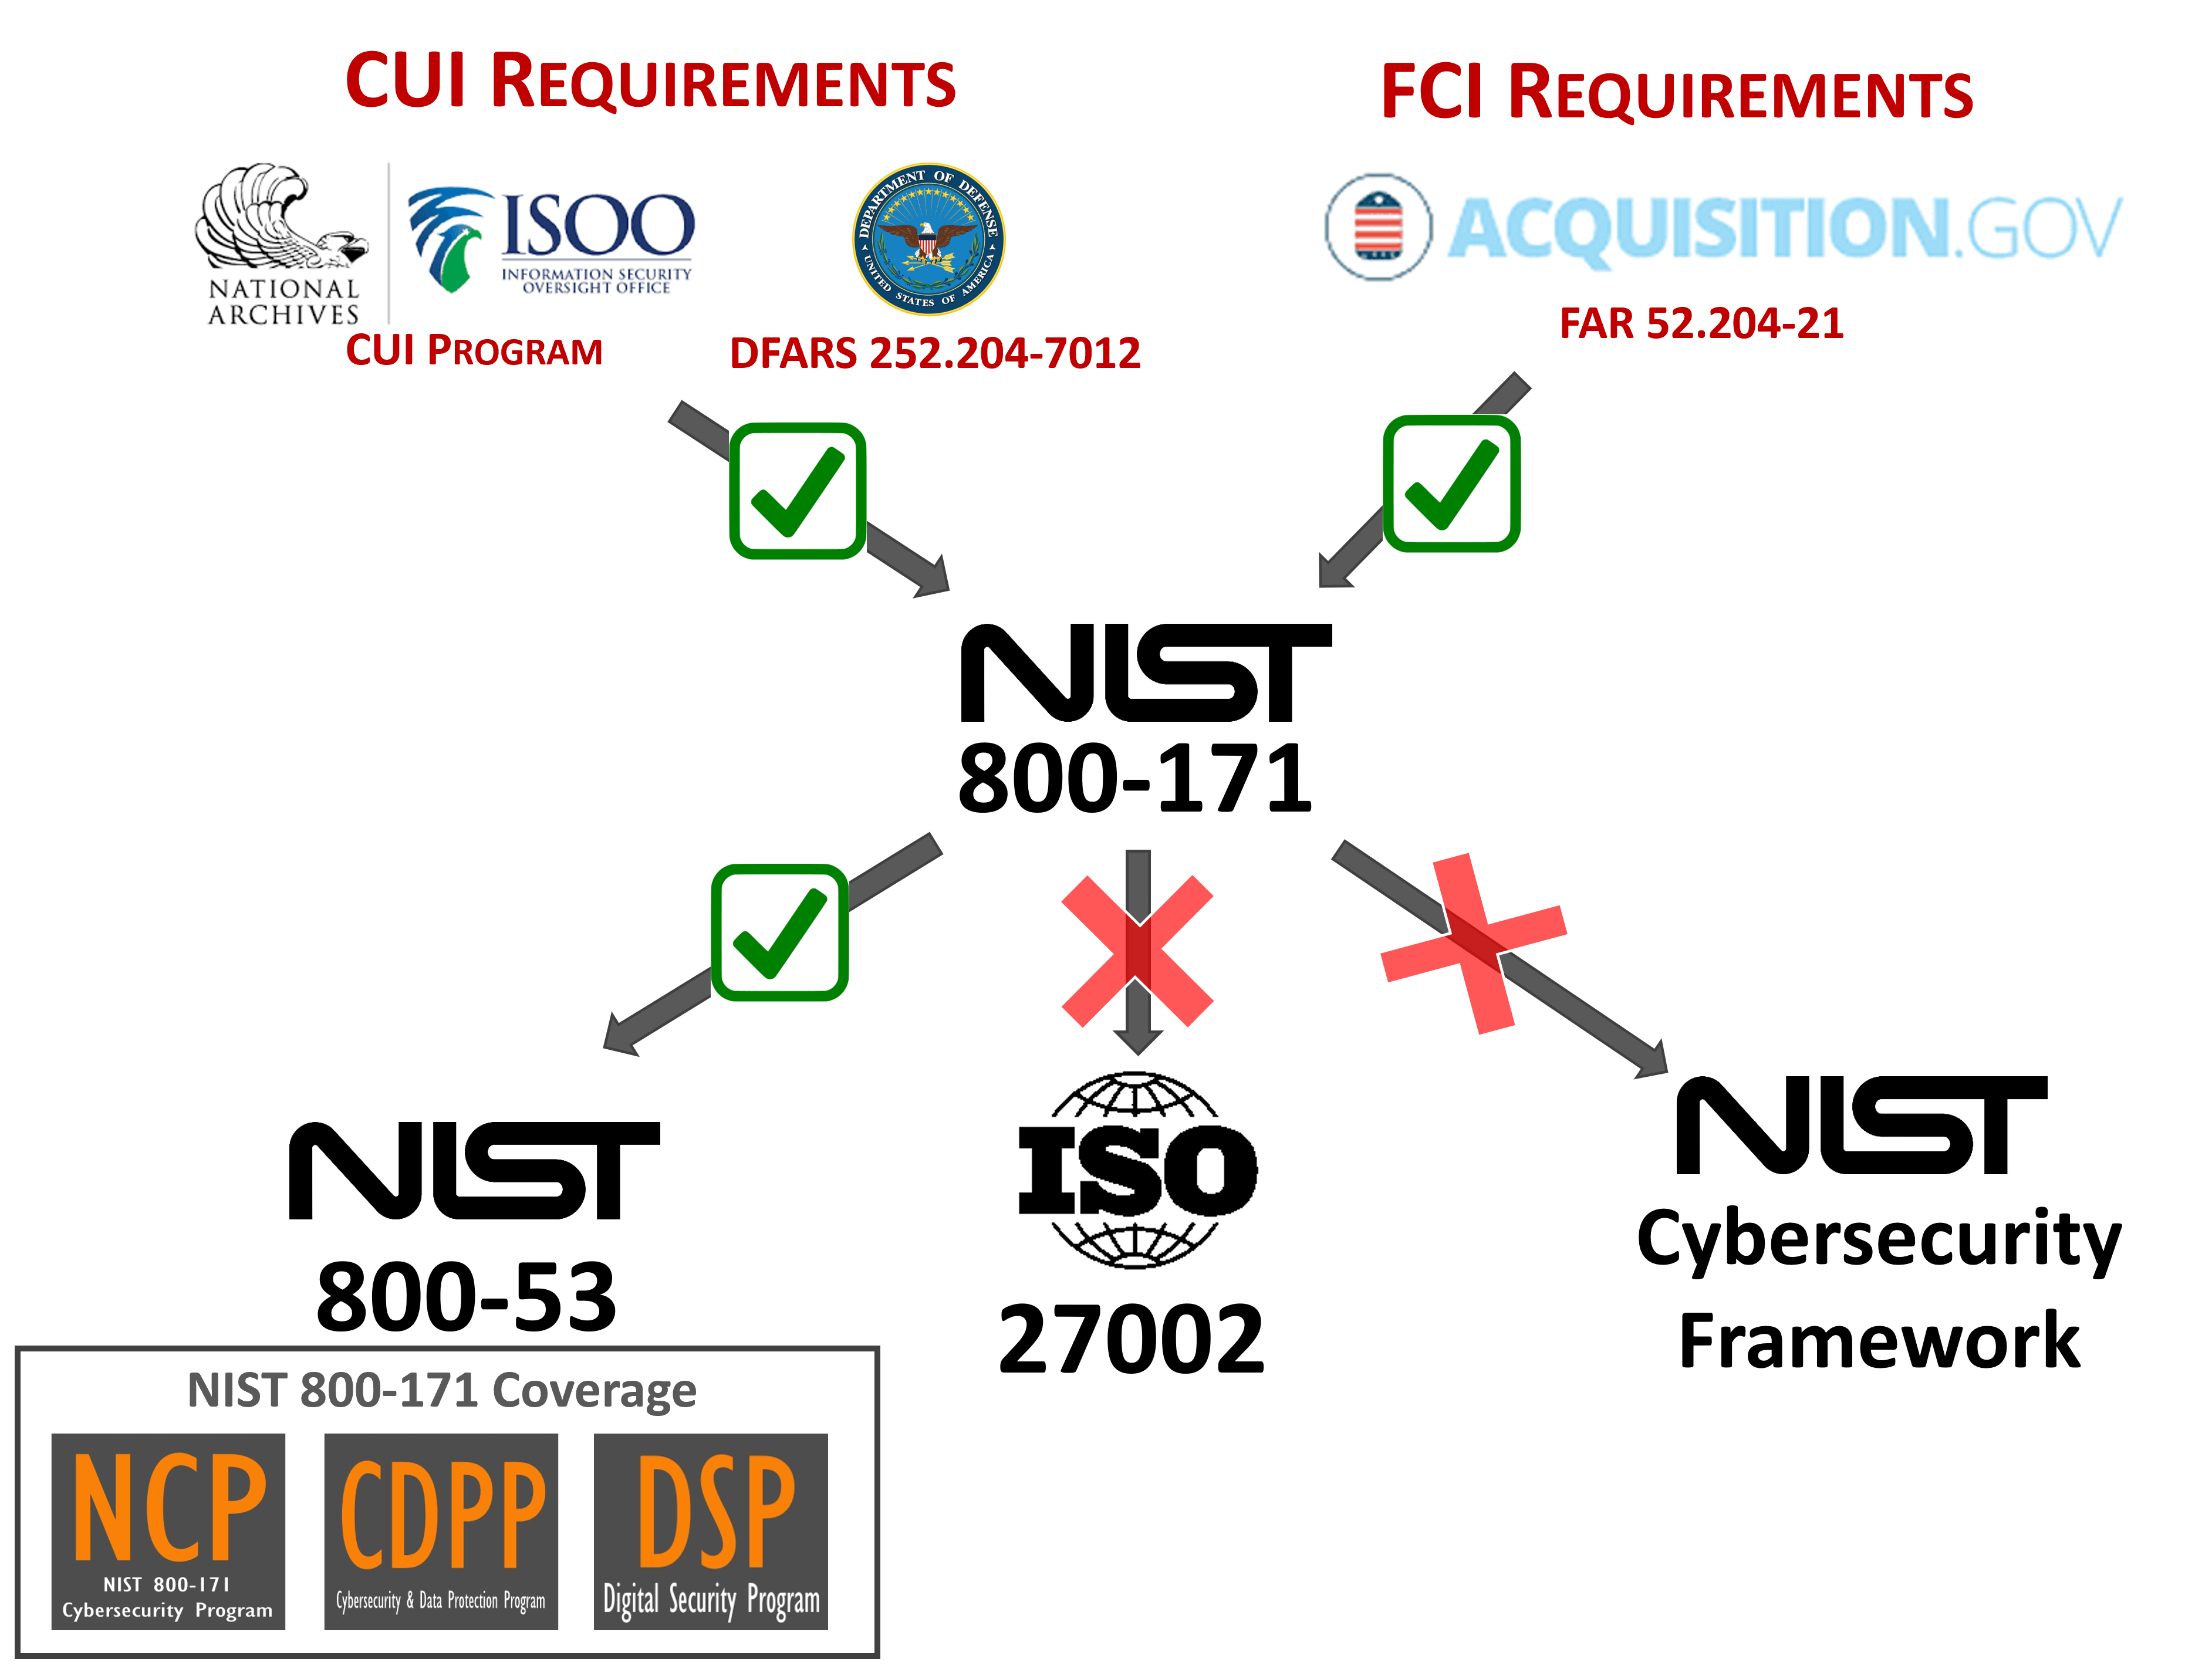 NIST 800-171 policy templates